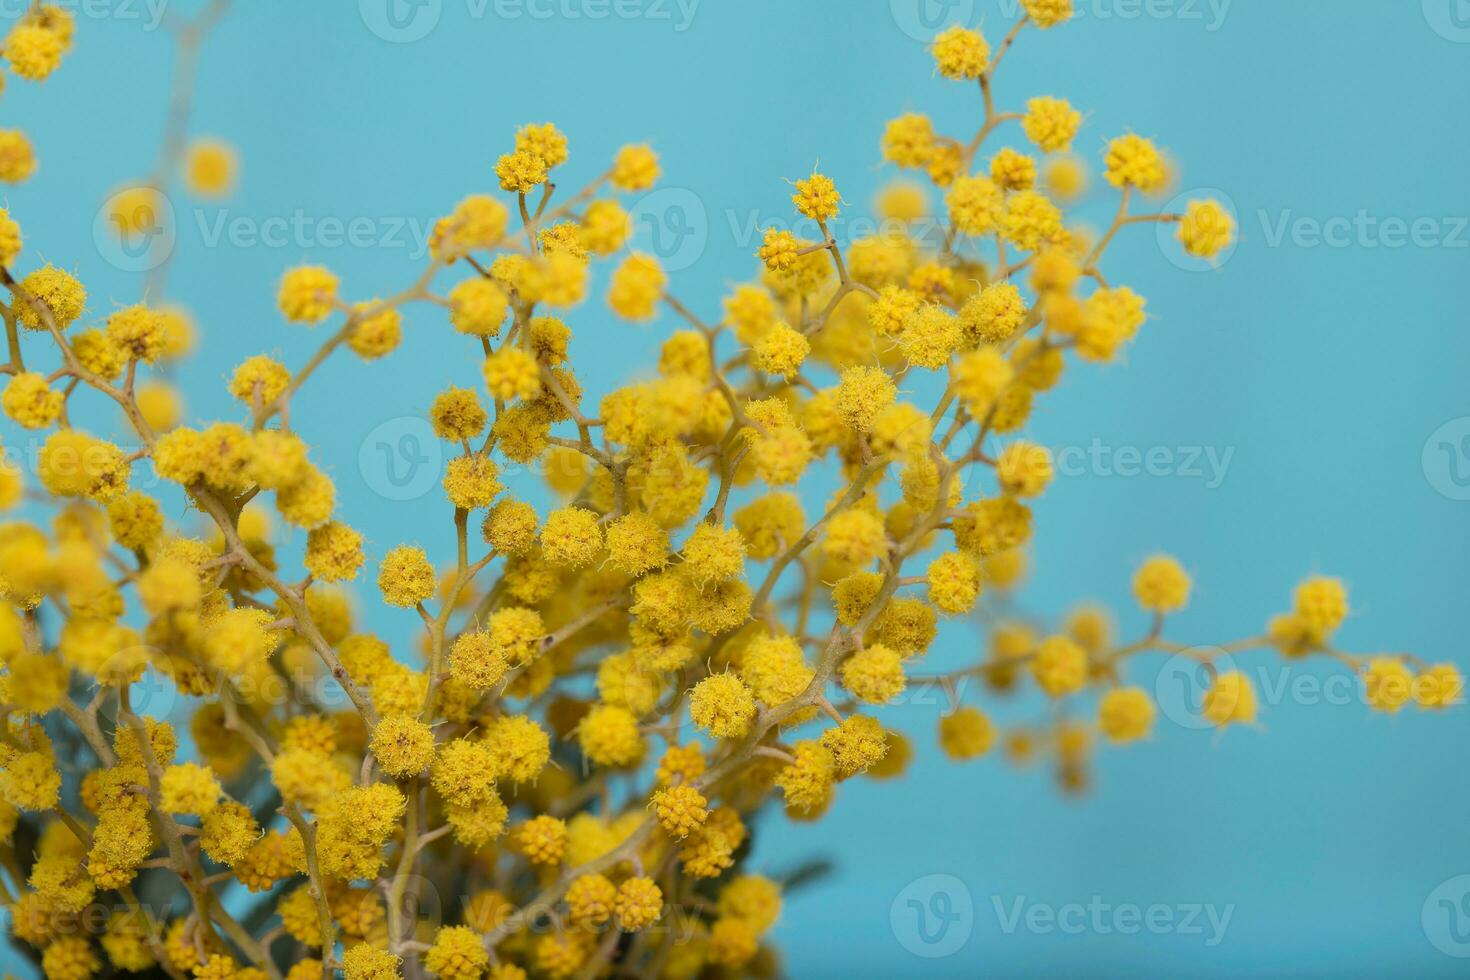 Mimosa flowers on a wooden surface. photo